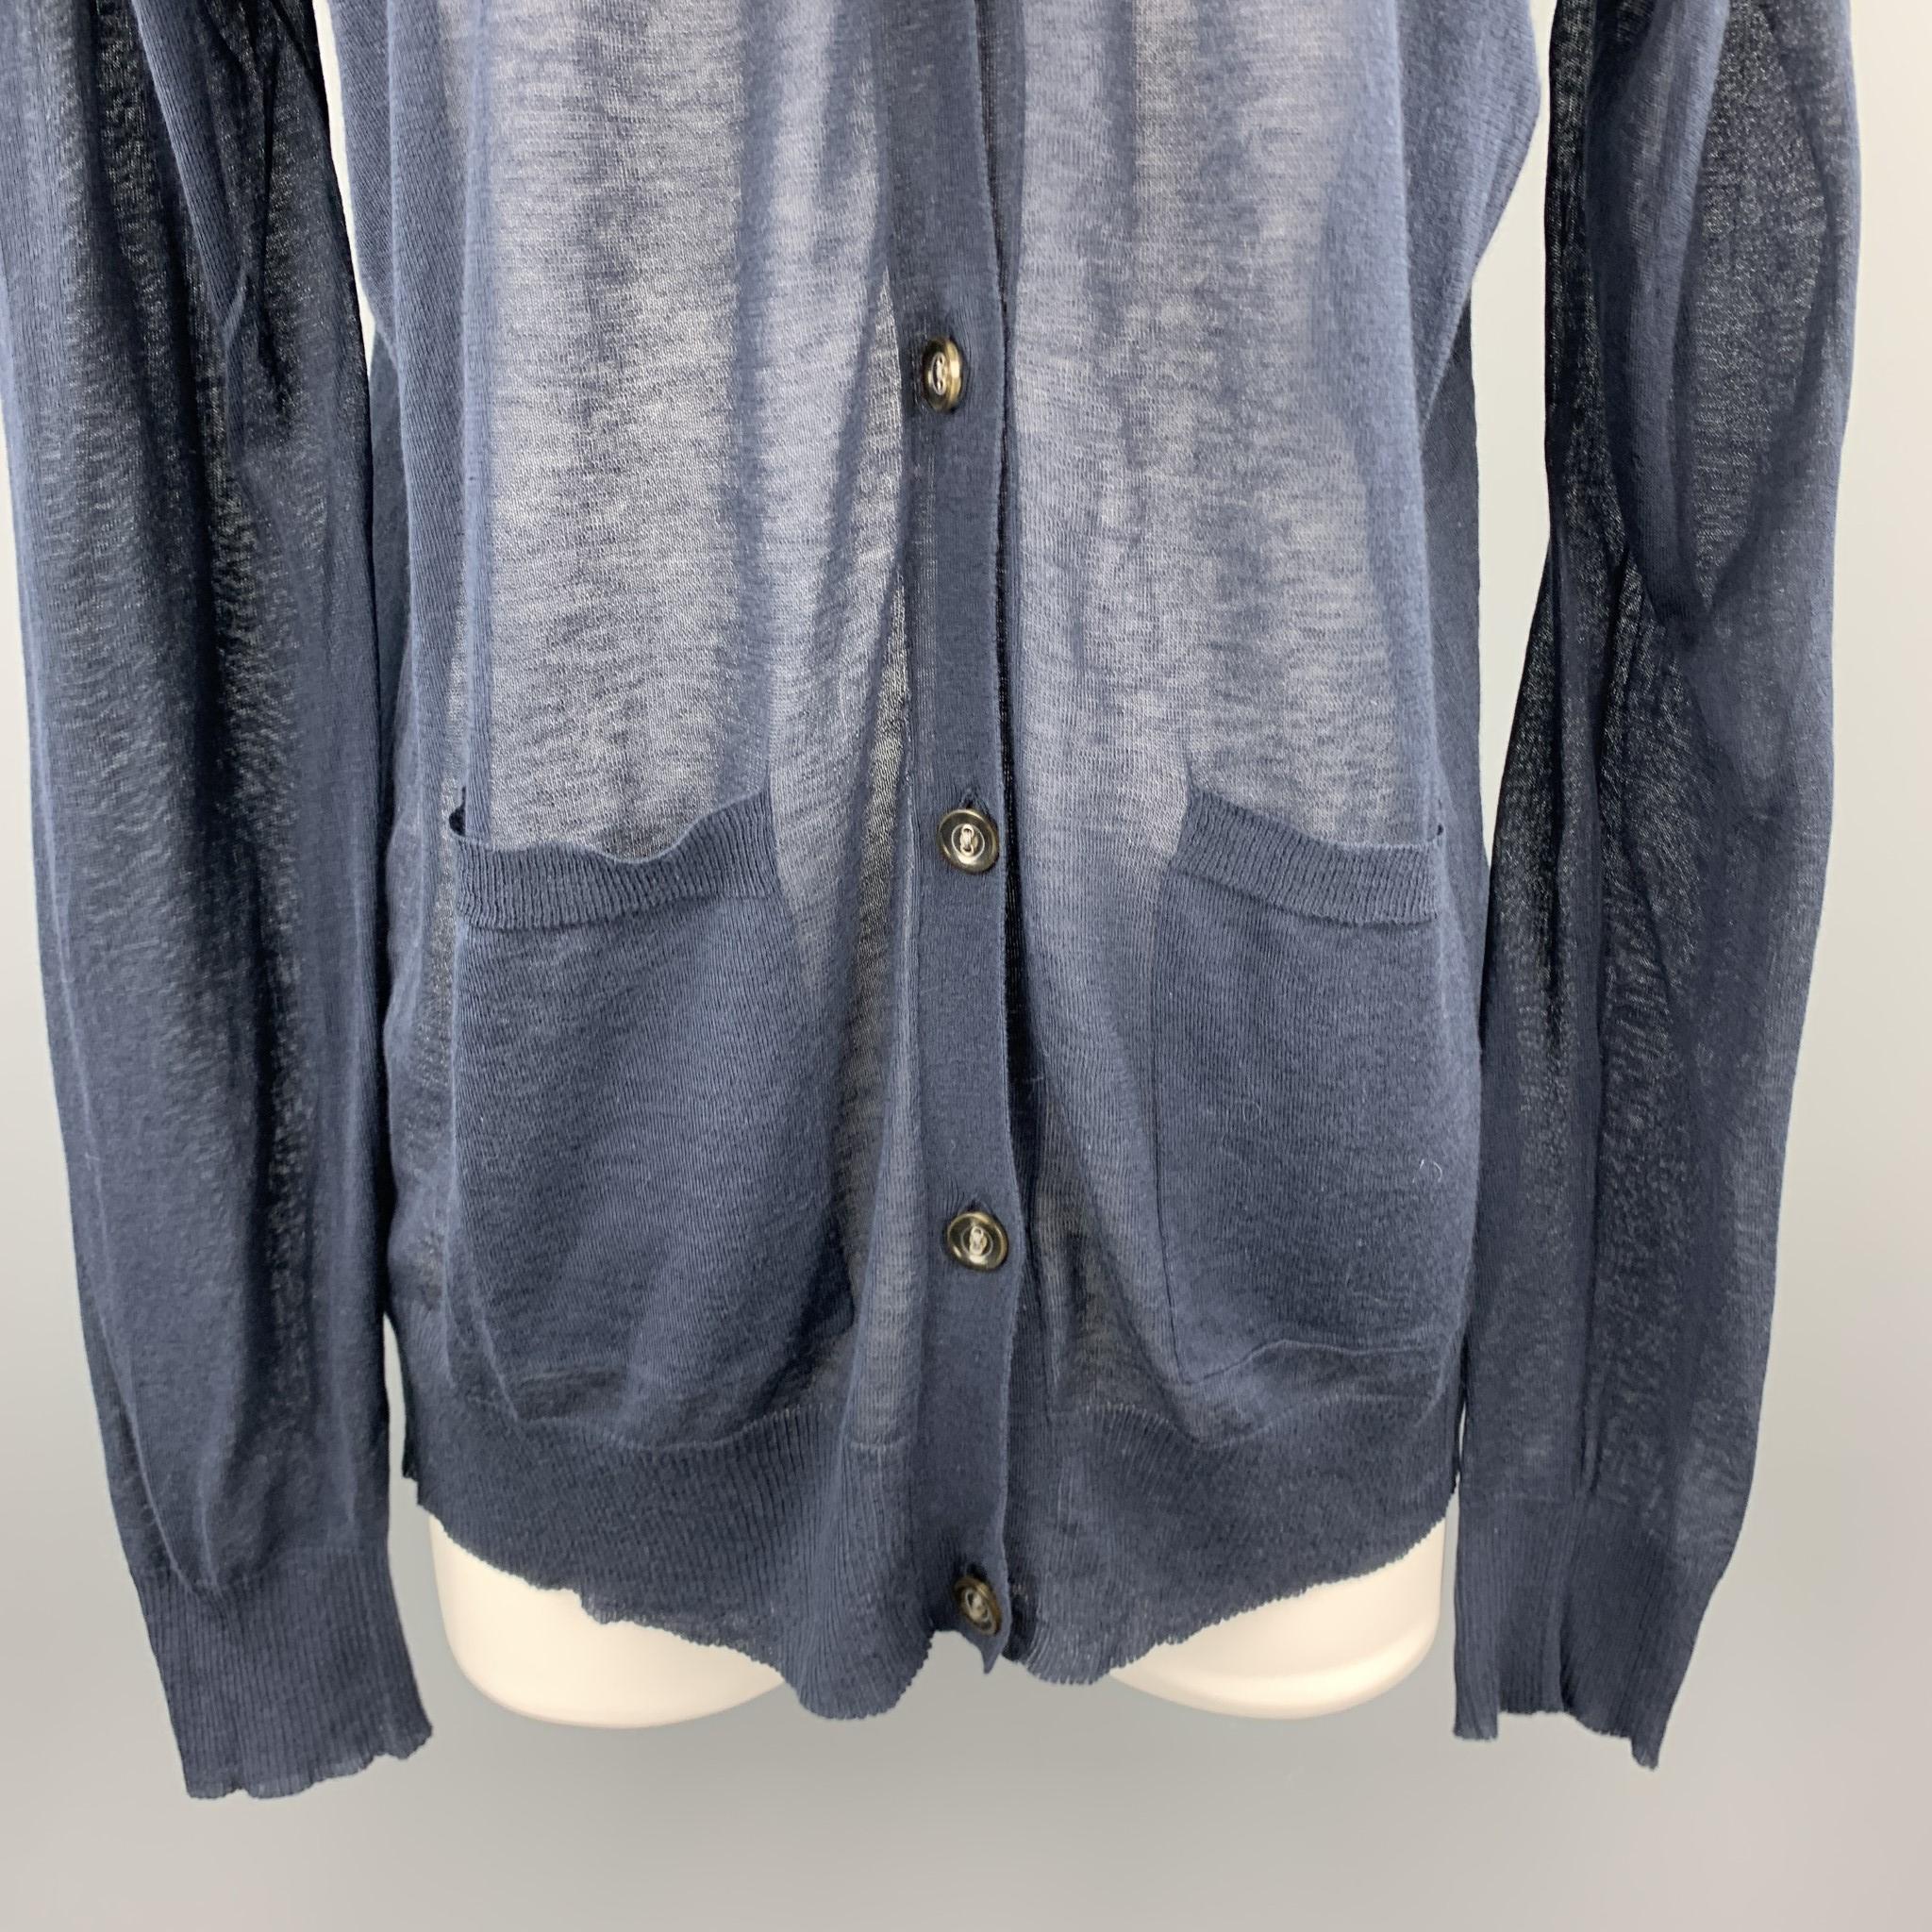 DRIES VAN NOTEN oversized cardigan comes in a sheer burnout cotton cashmere blend knit with a V neck and patch pockets. Made in Belgium.

Excellent Pre-Owned Condition.
Marked: Medium

Measurements:

Shoulder: 20 in.
Bust: 48 in.
Sleeve: 26